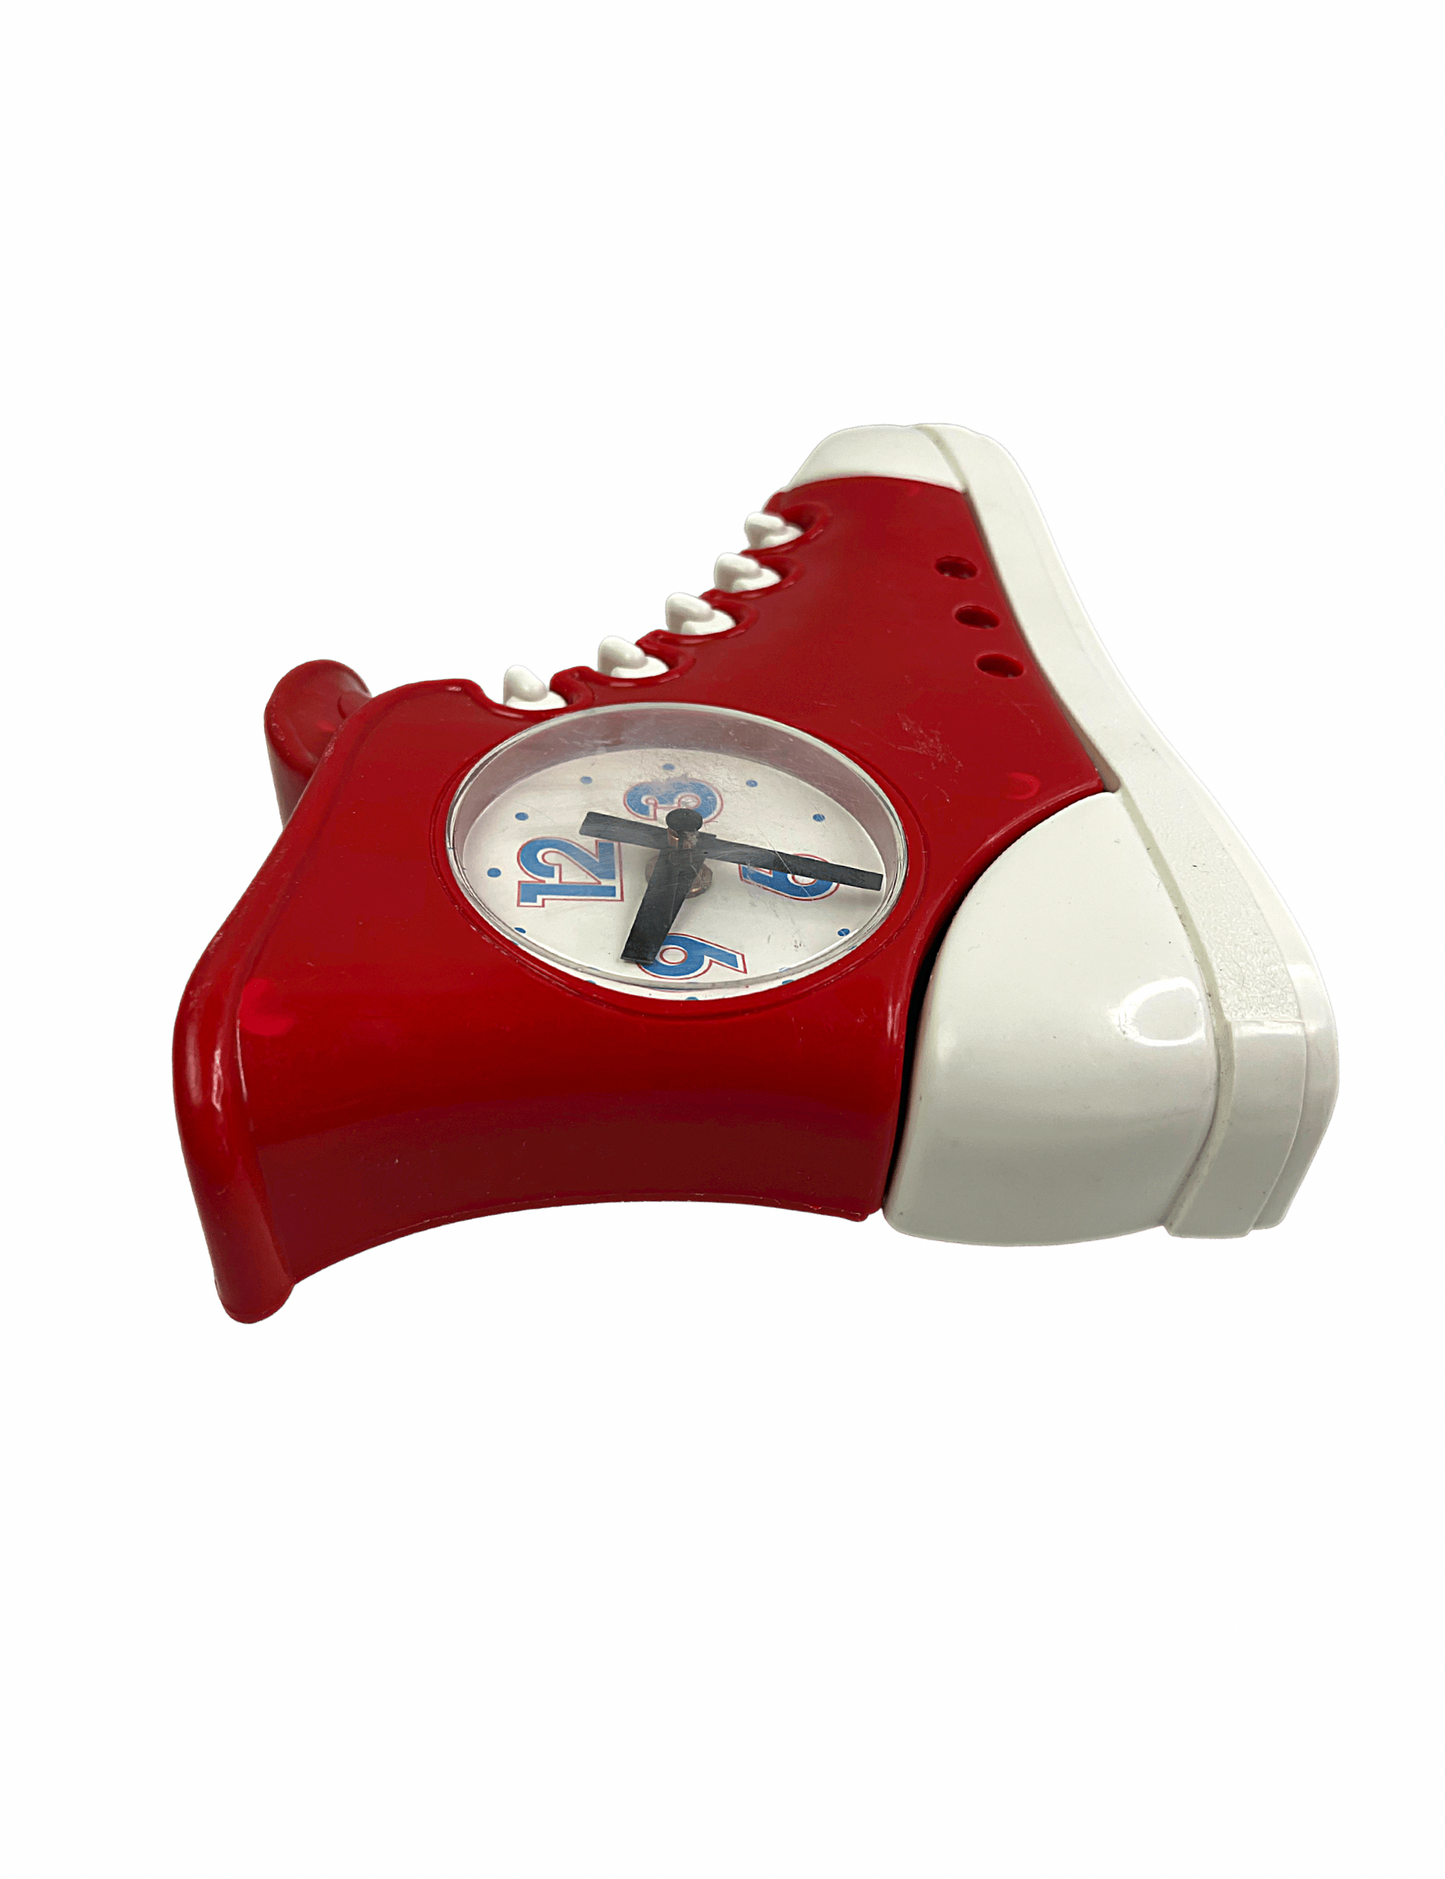 80’s Red Sneaker High Top Wall Clock